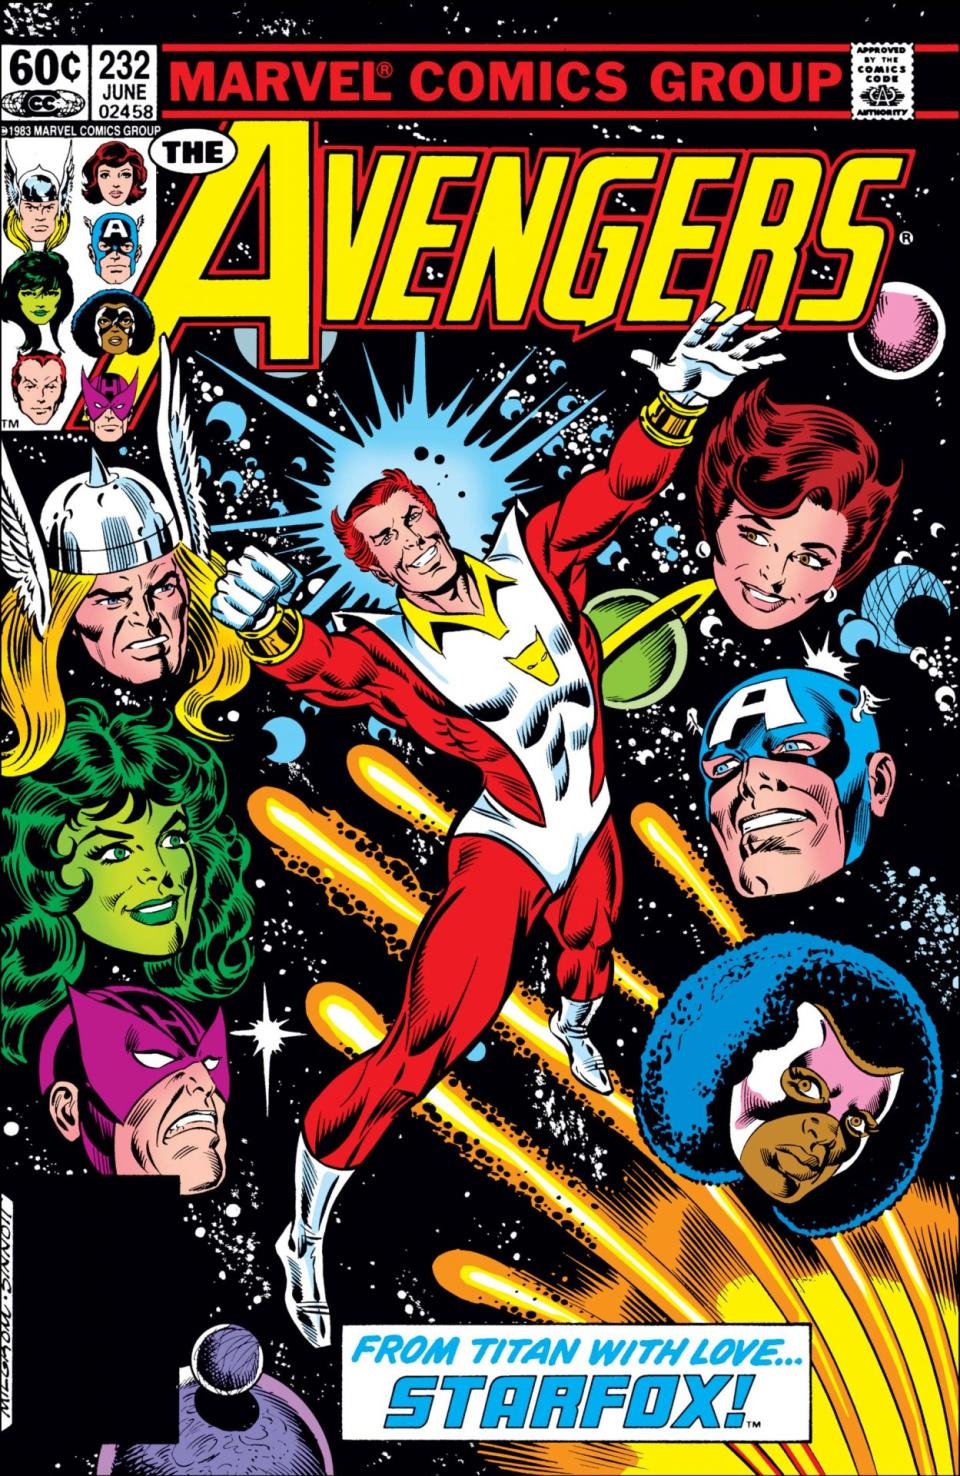 The cover for Avengers #232 by Al Milgrom and Joe Sinnott shows Eros a man in a white and red super suit flying through space surrounded by the heads of the avengers including Captain America, She Hulk, Thor